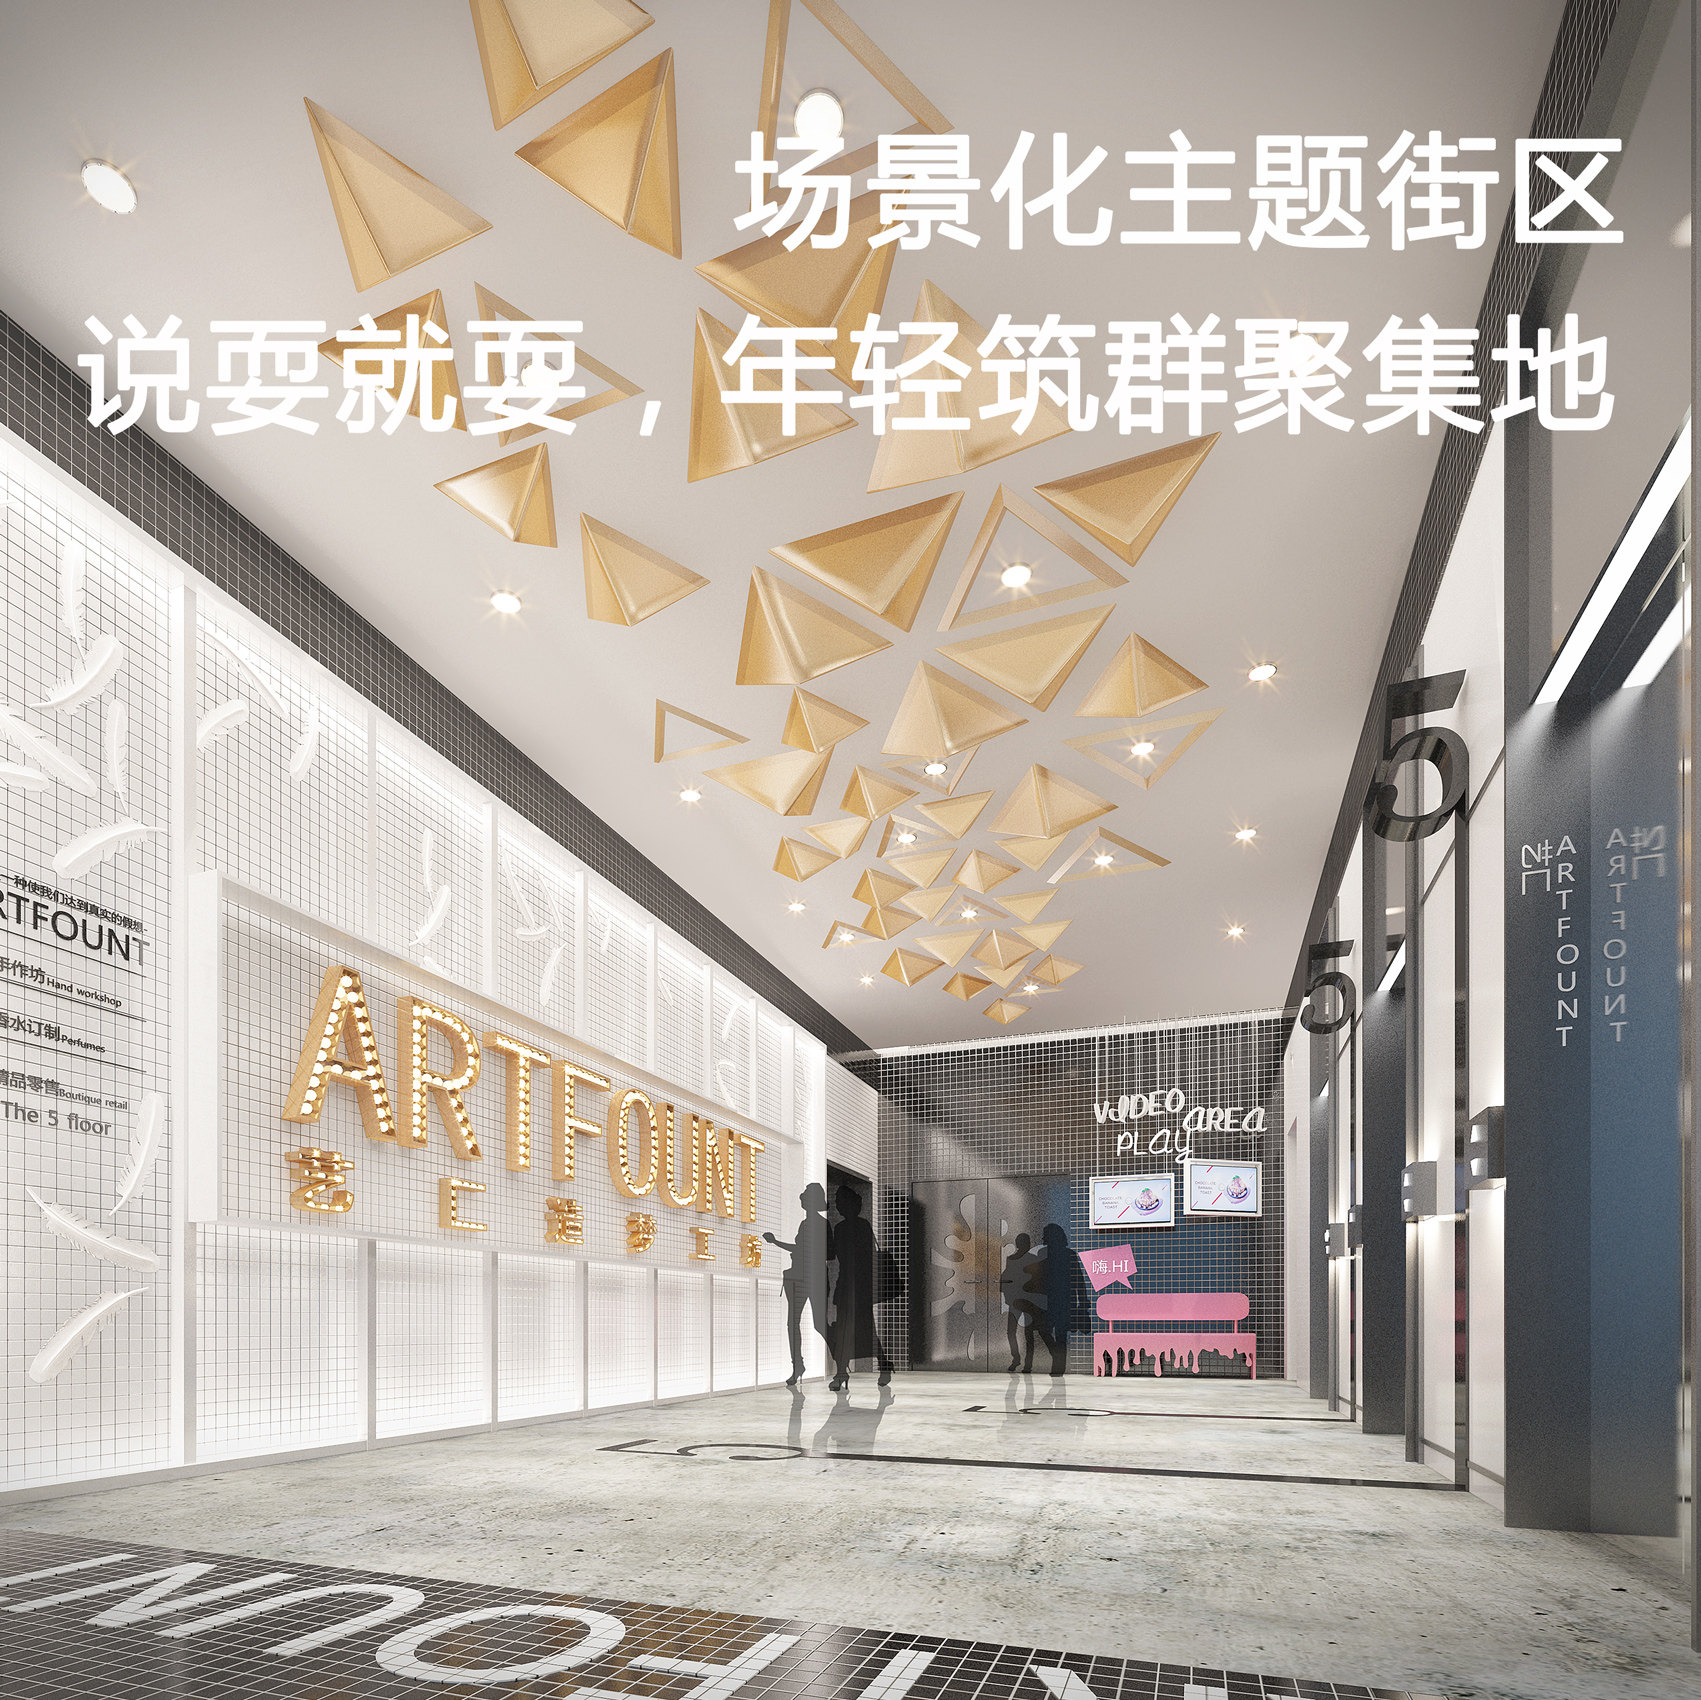 Planning strategy+Commercial atmosphere construction+Interior design   Beijing Road,Guangzhou,China